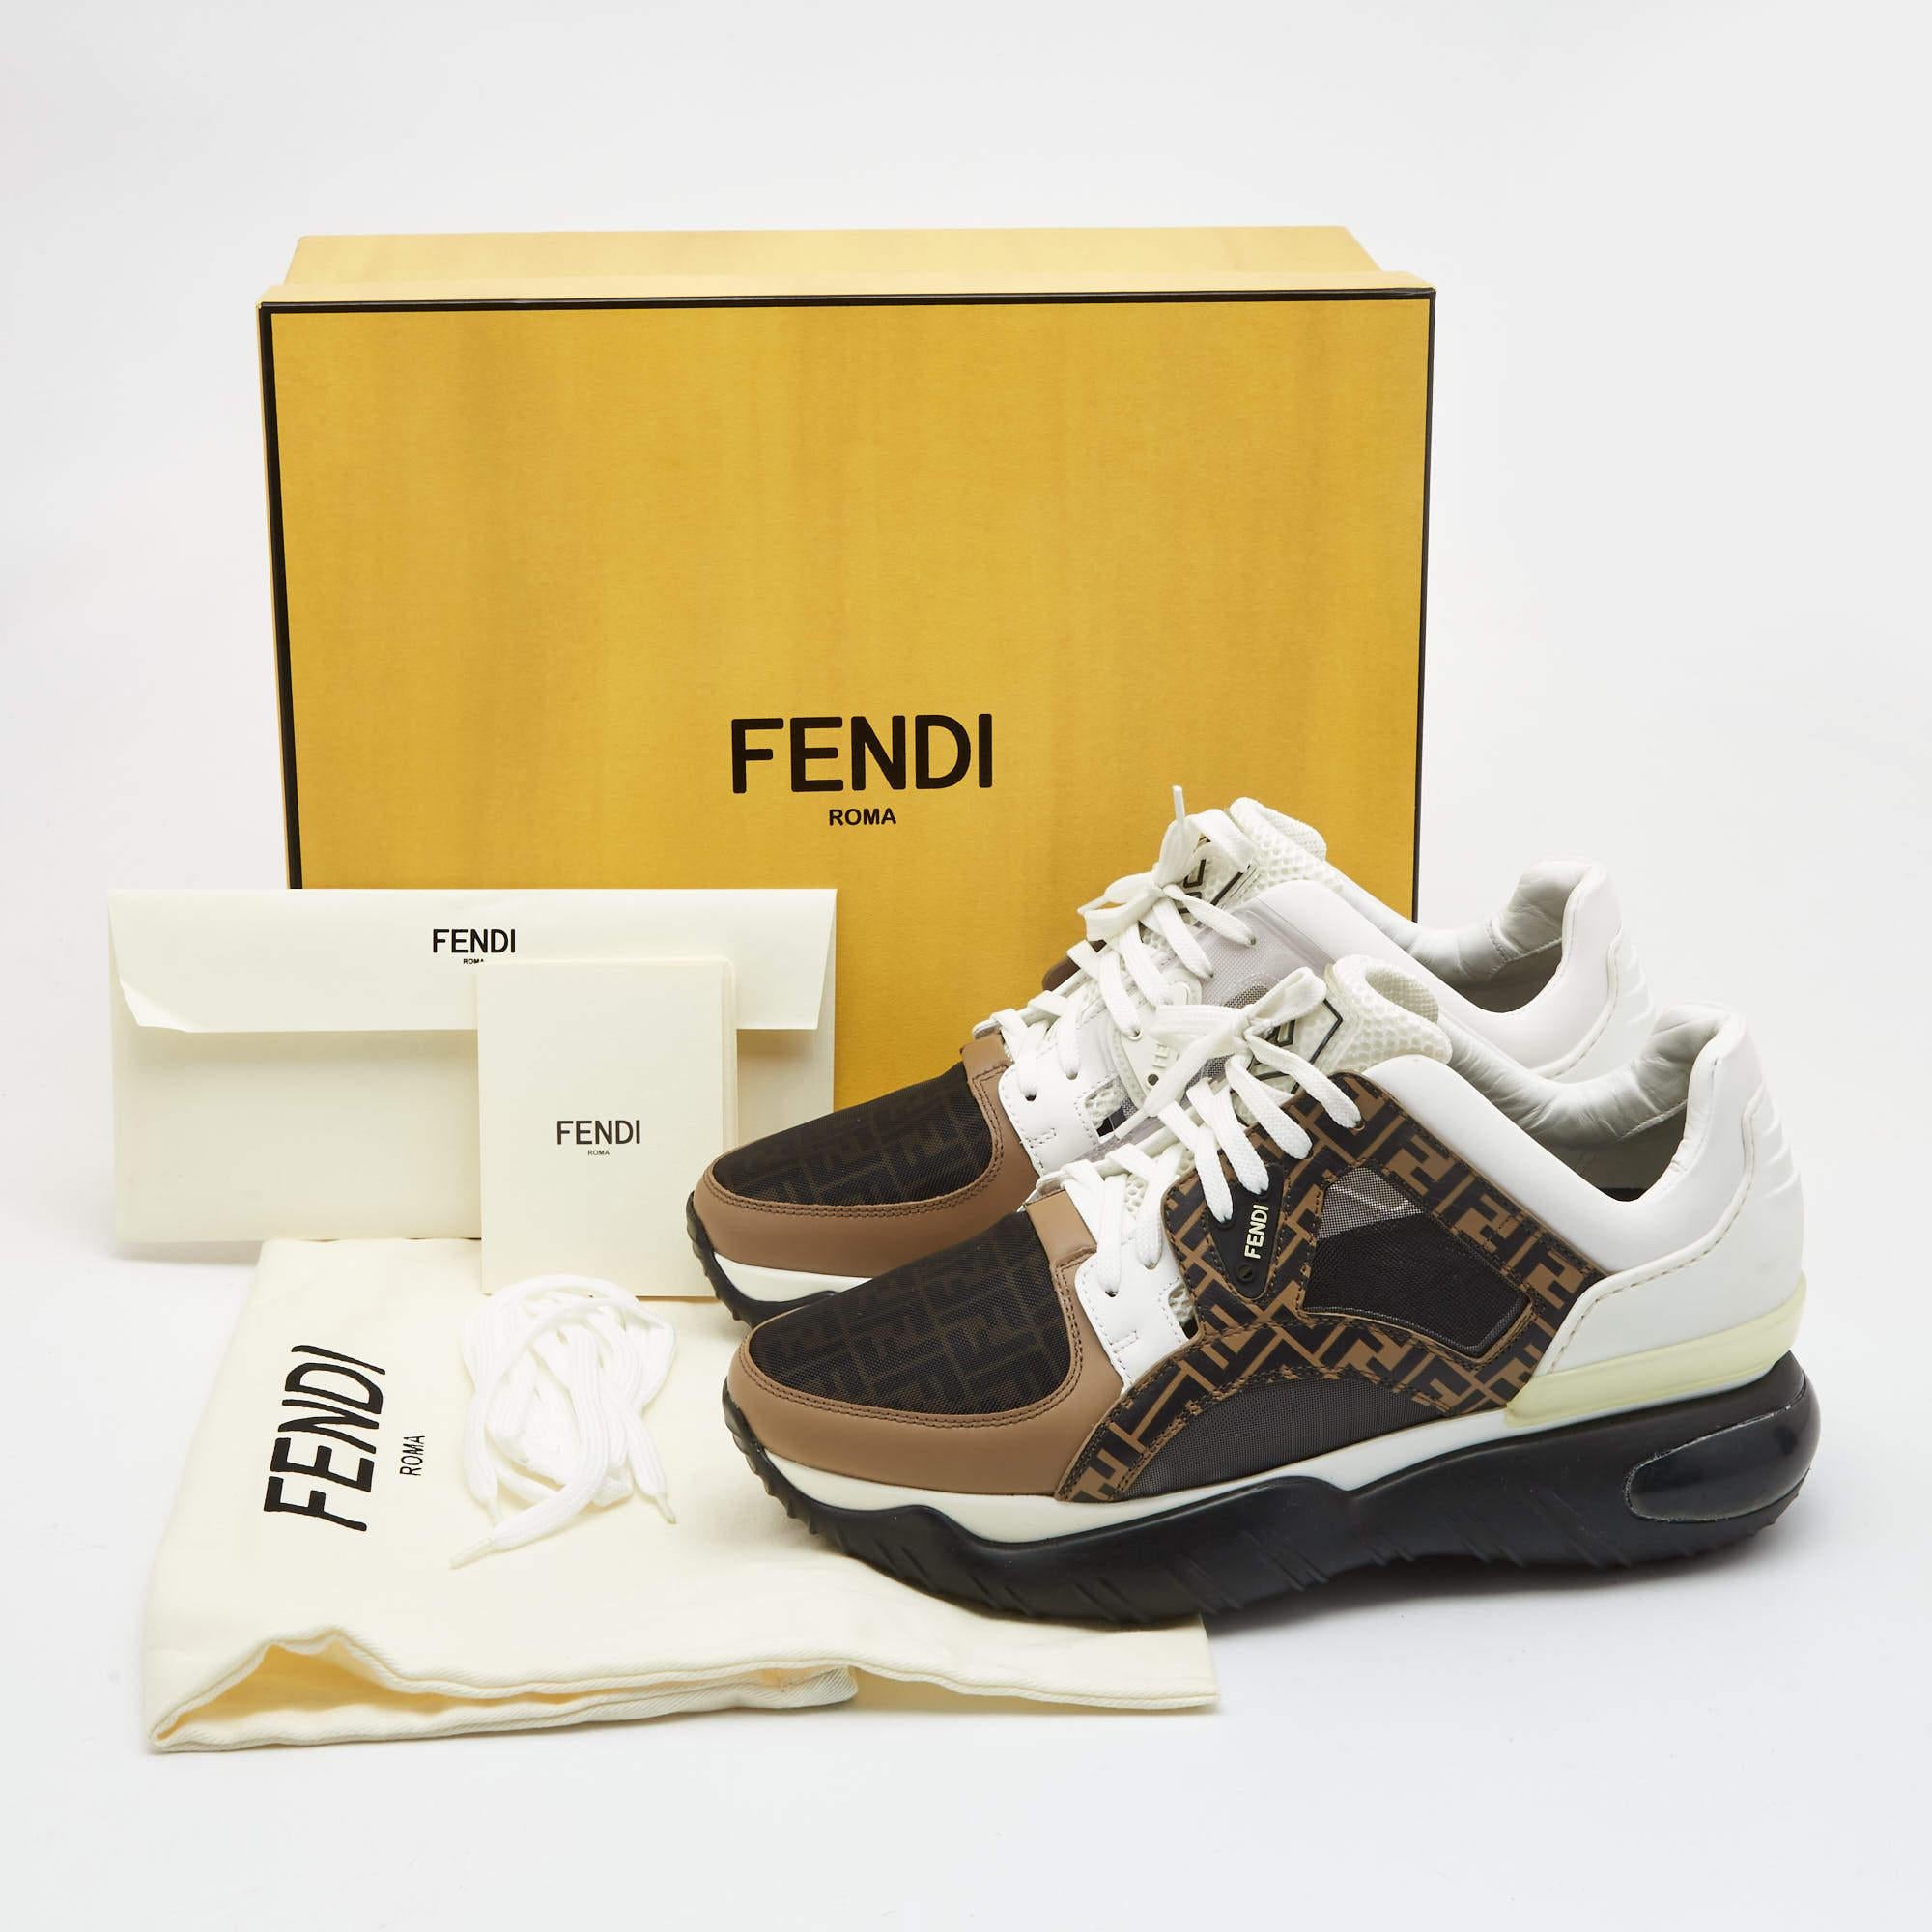 Fendi Multicolor Mesh and Leather Forever Fendi Low Top Sneakers Size 41 3